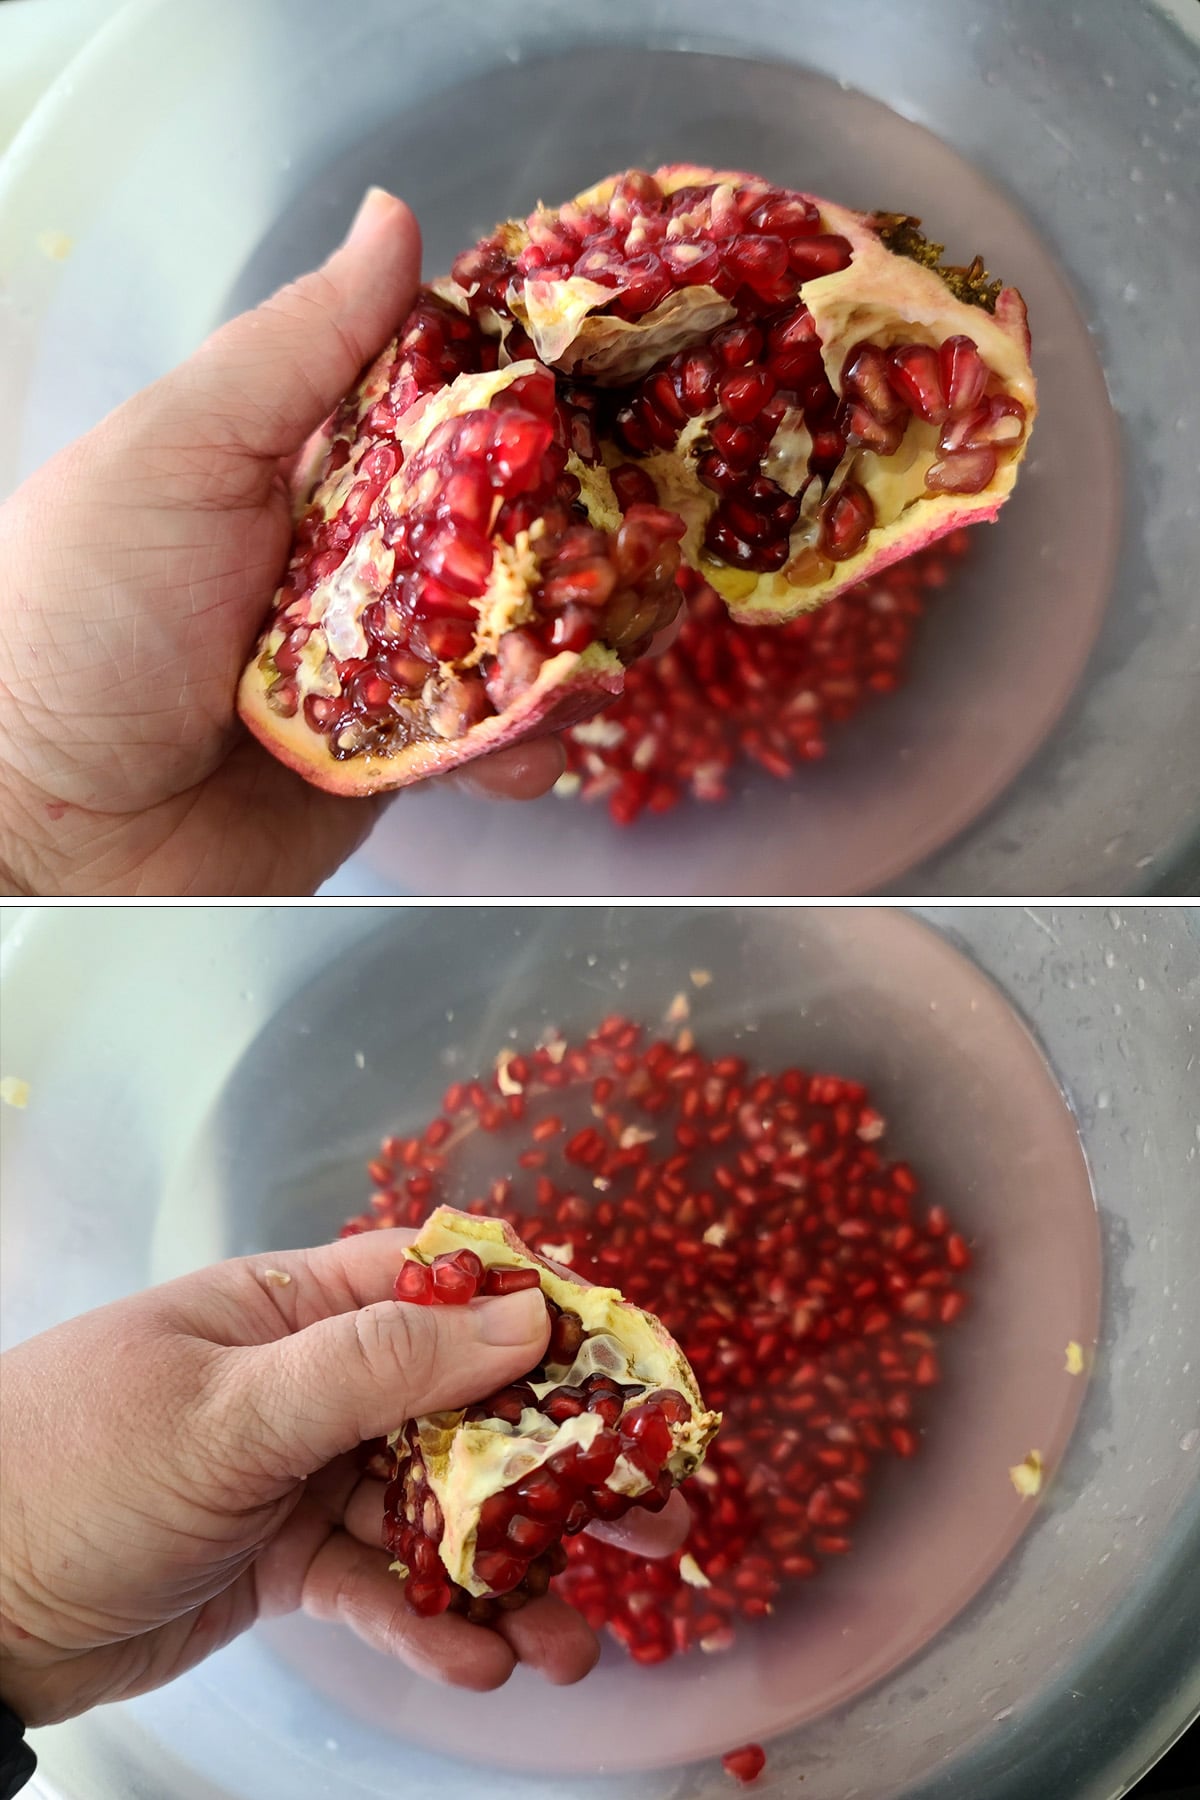 The arils being removed from a chunk of pomegranate.